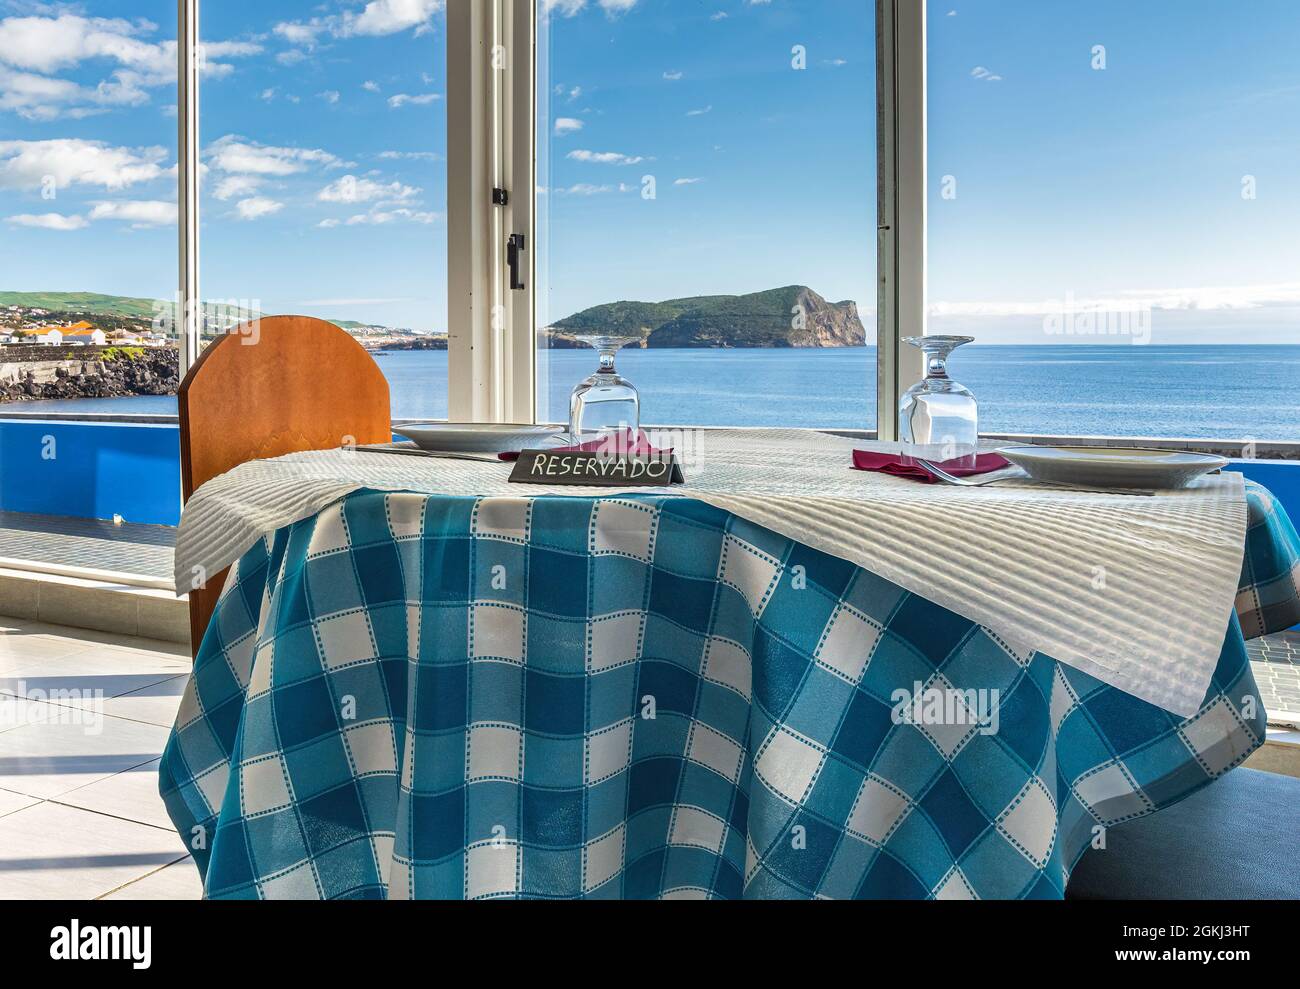 Reserved table in a restaurant with a view of the coast of Terceira, Azores, with a blue table cloth and a sign that says “reservado.” Stock Photo